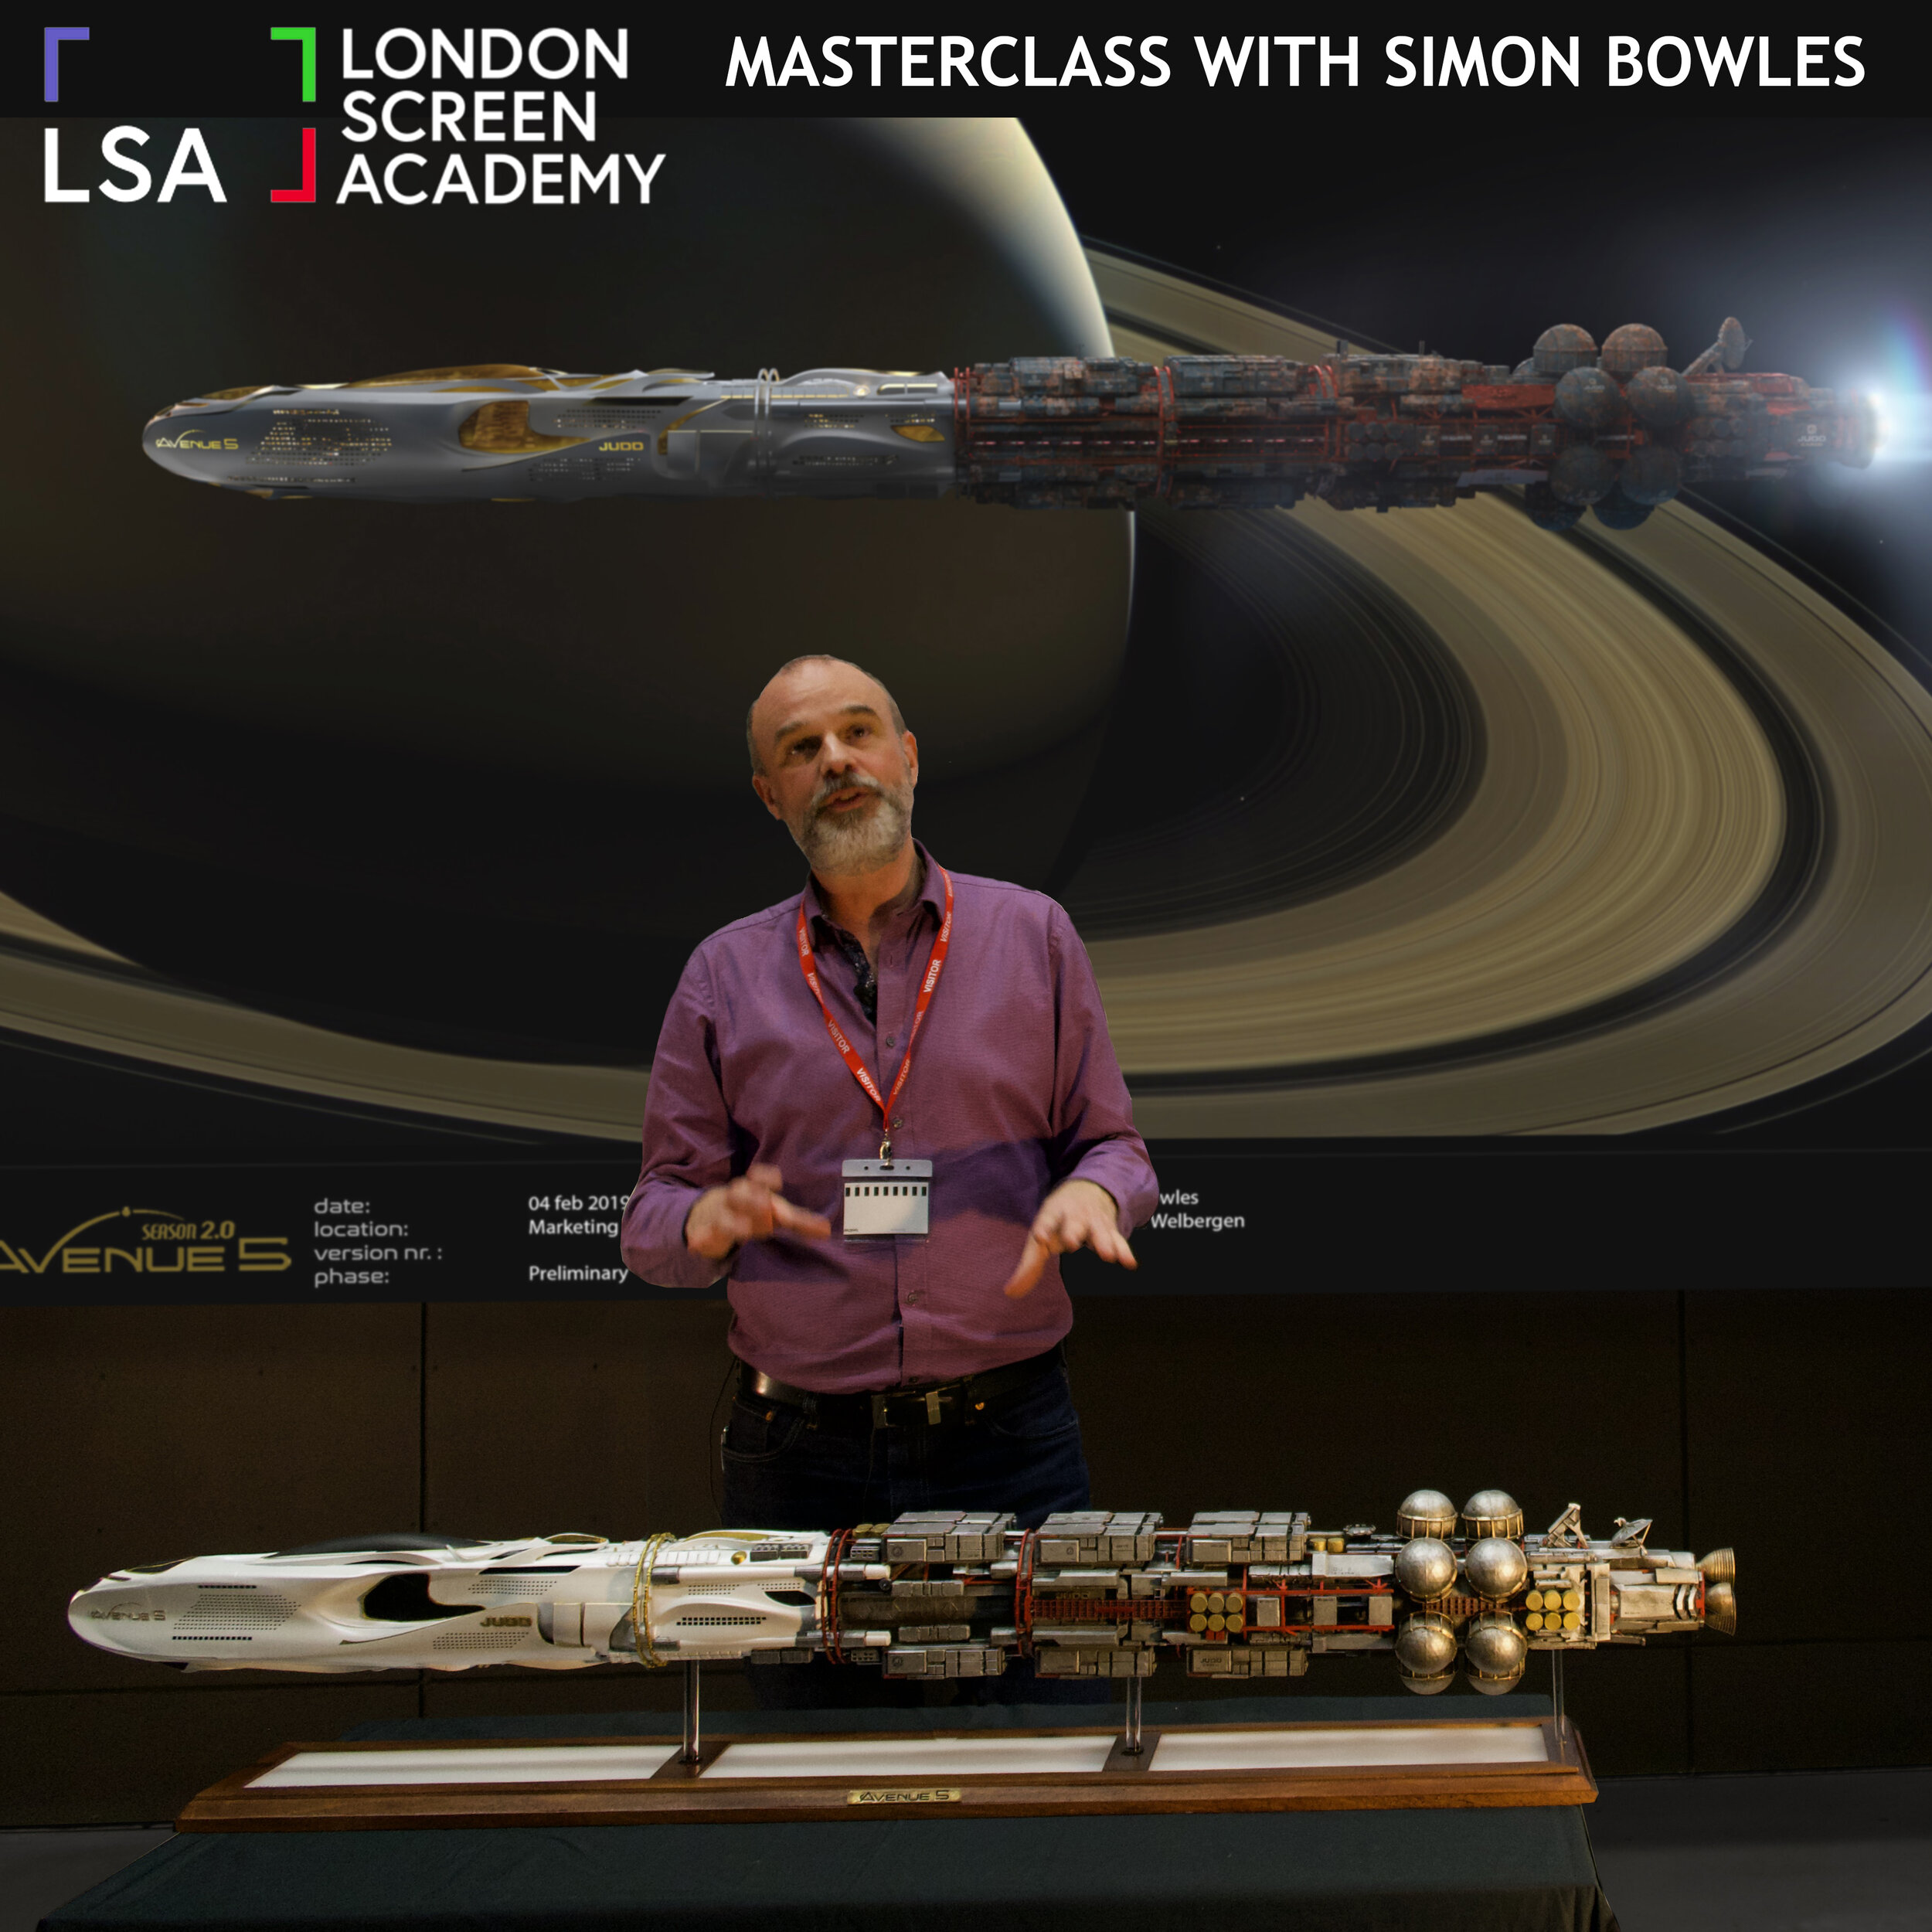 MASTERCLASS LECTURE AT LONDON SCREEN ACADEMY